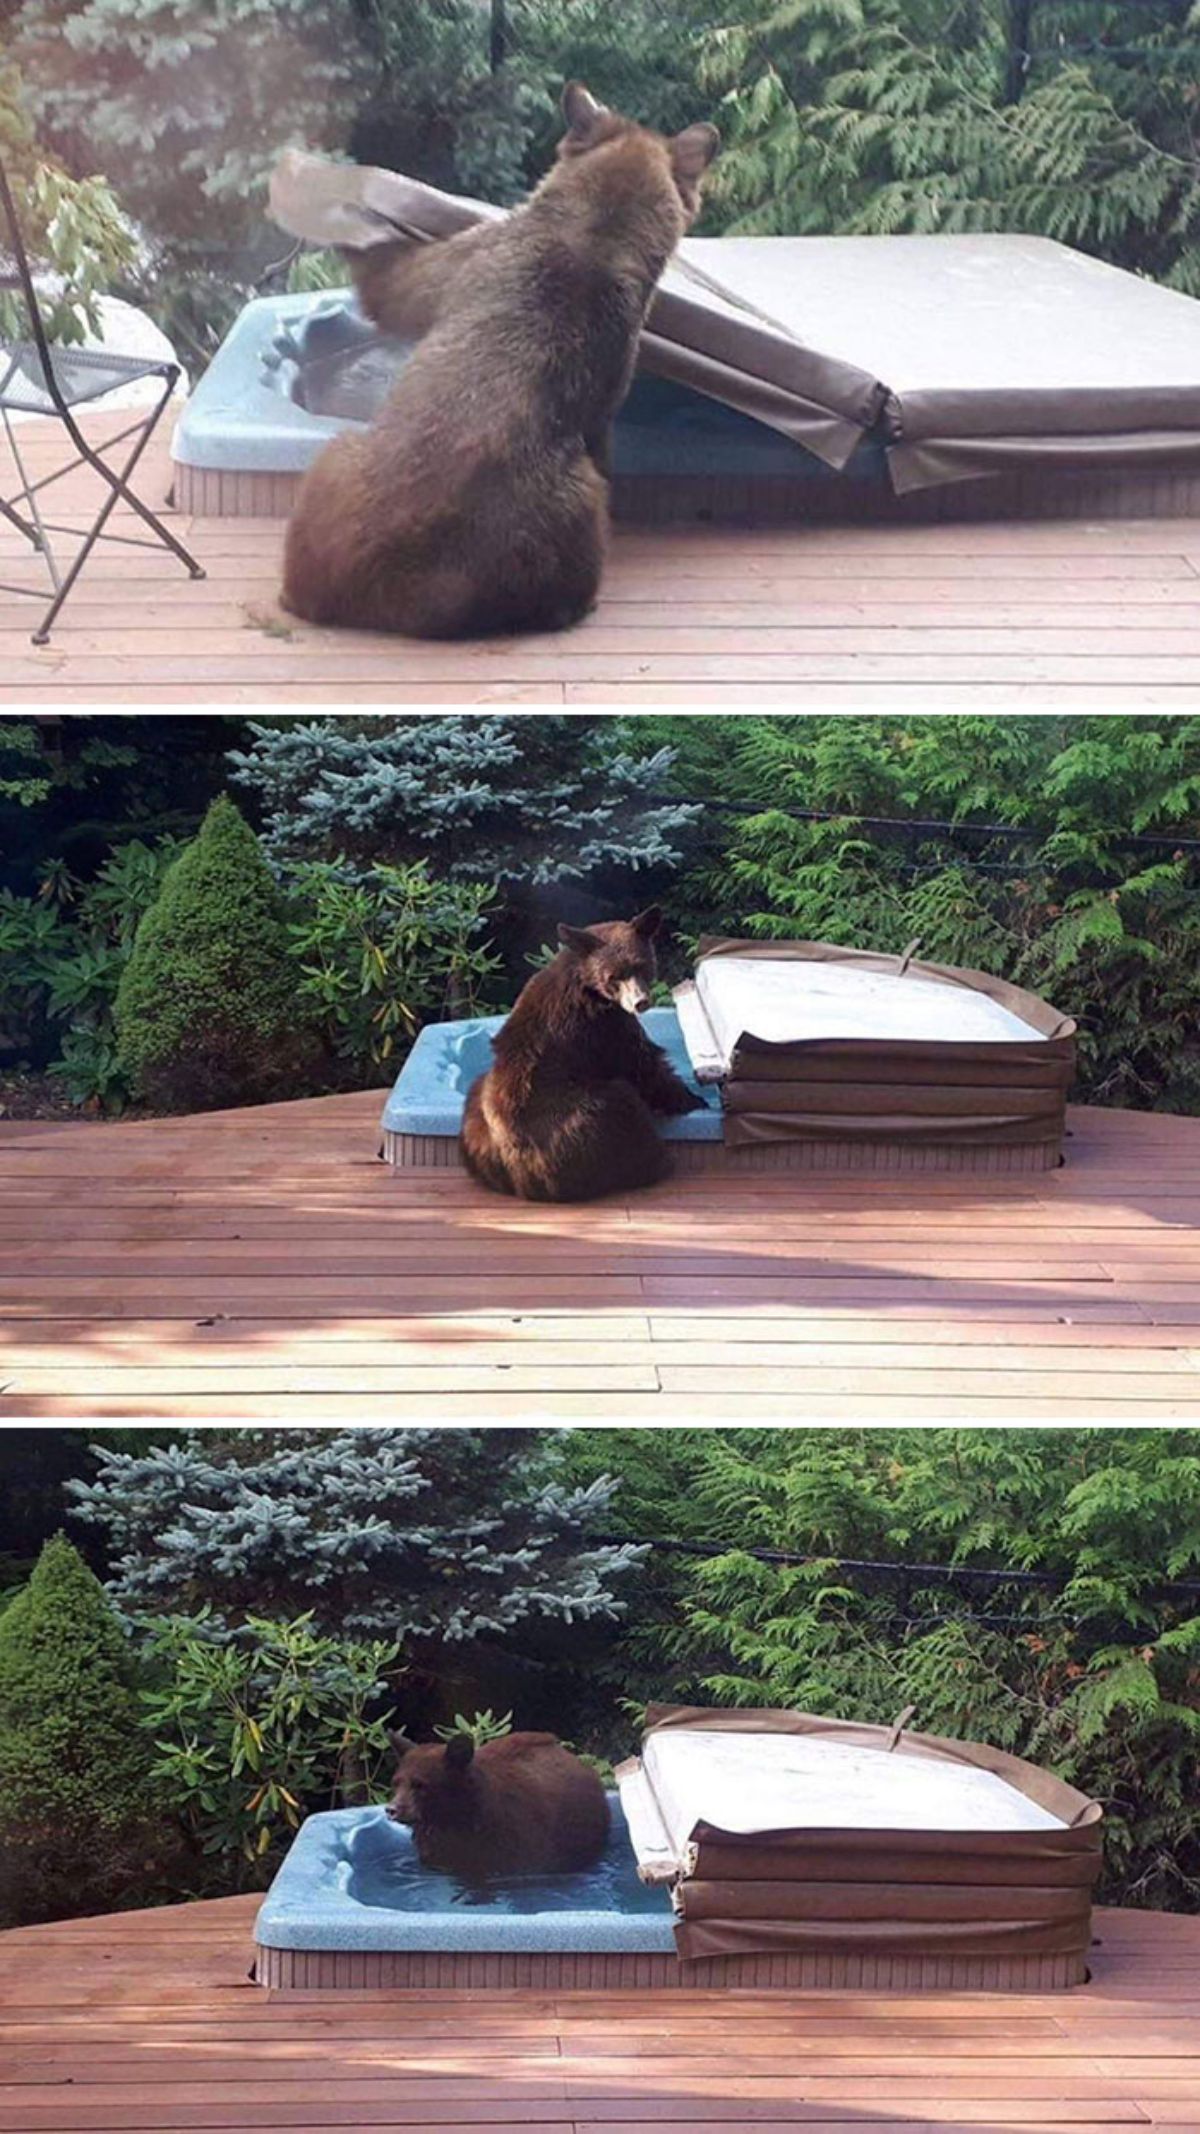 3 photos of a brown bear opening the cover of a jacuzzi and laying in the water